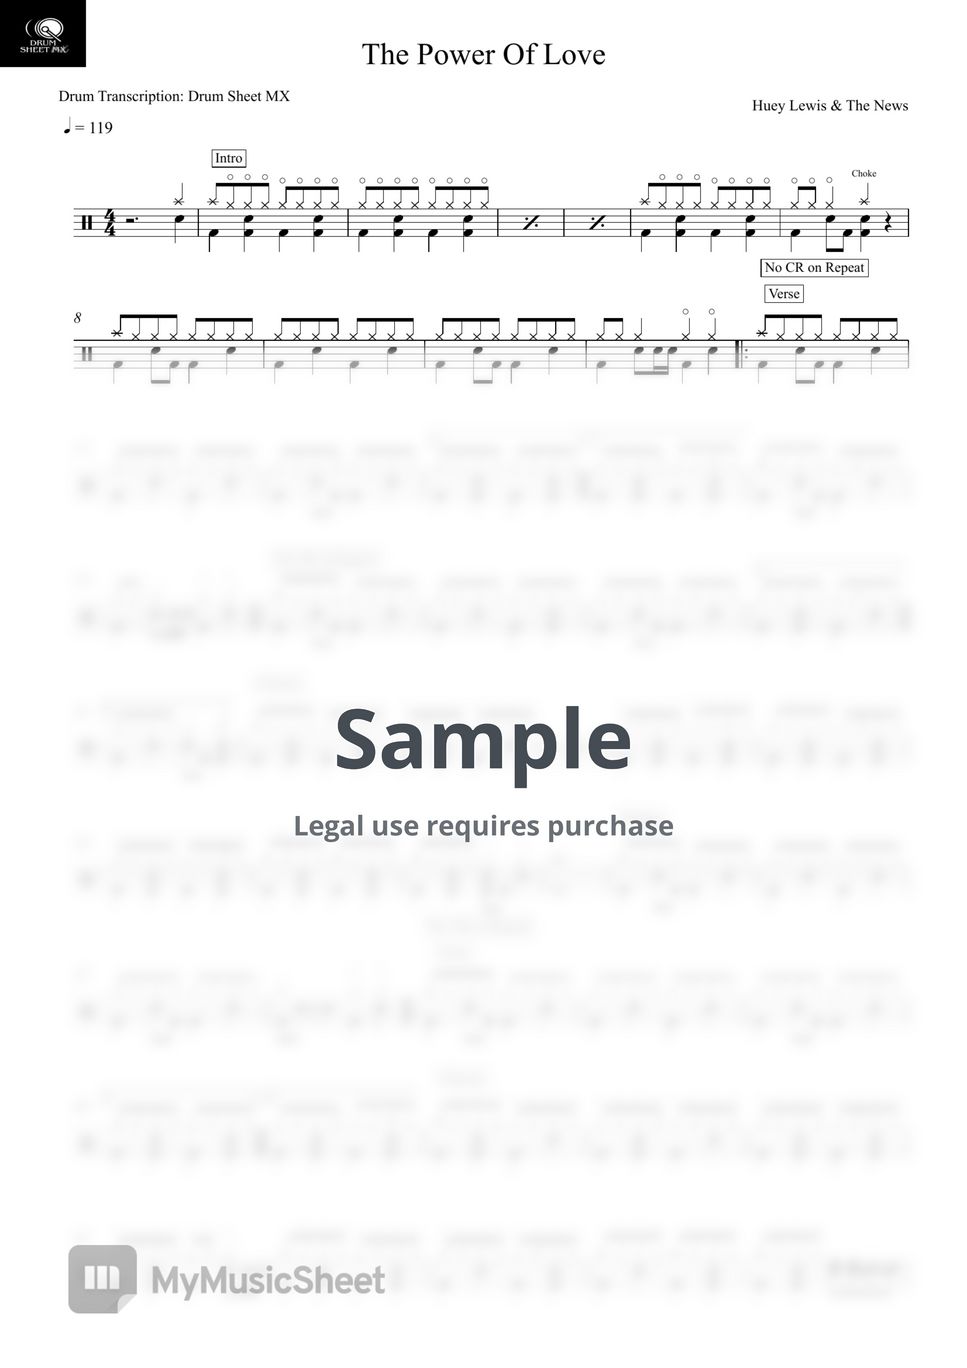 Huey Lewis & The News - The Power Of Love by Drum Transcription: Drum Sheet MX